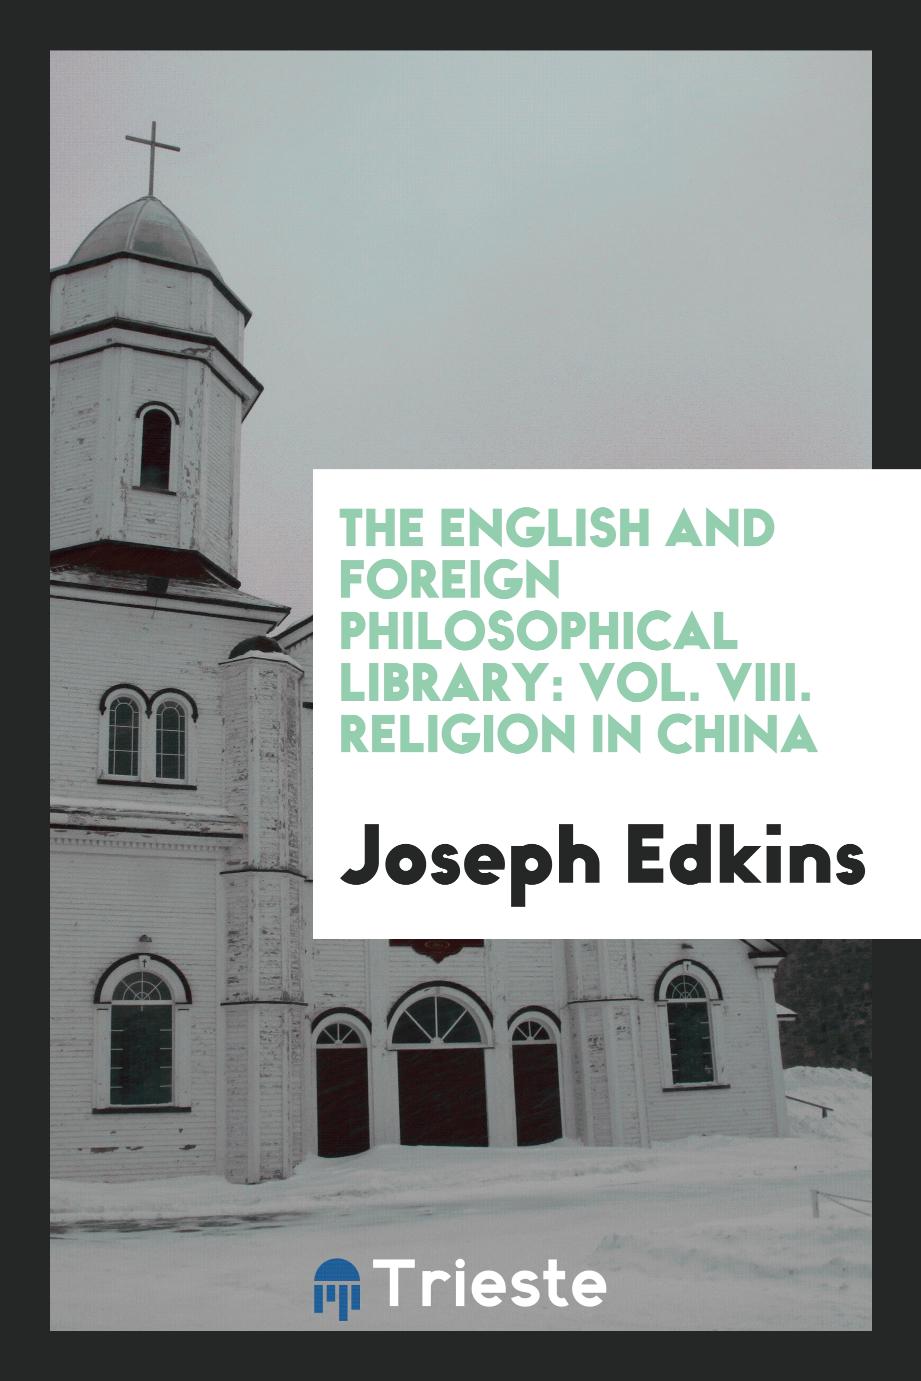 The English and Foreign Philosophical Library: Vol. VIII. Religion in China